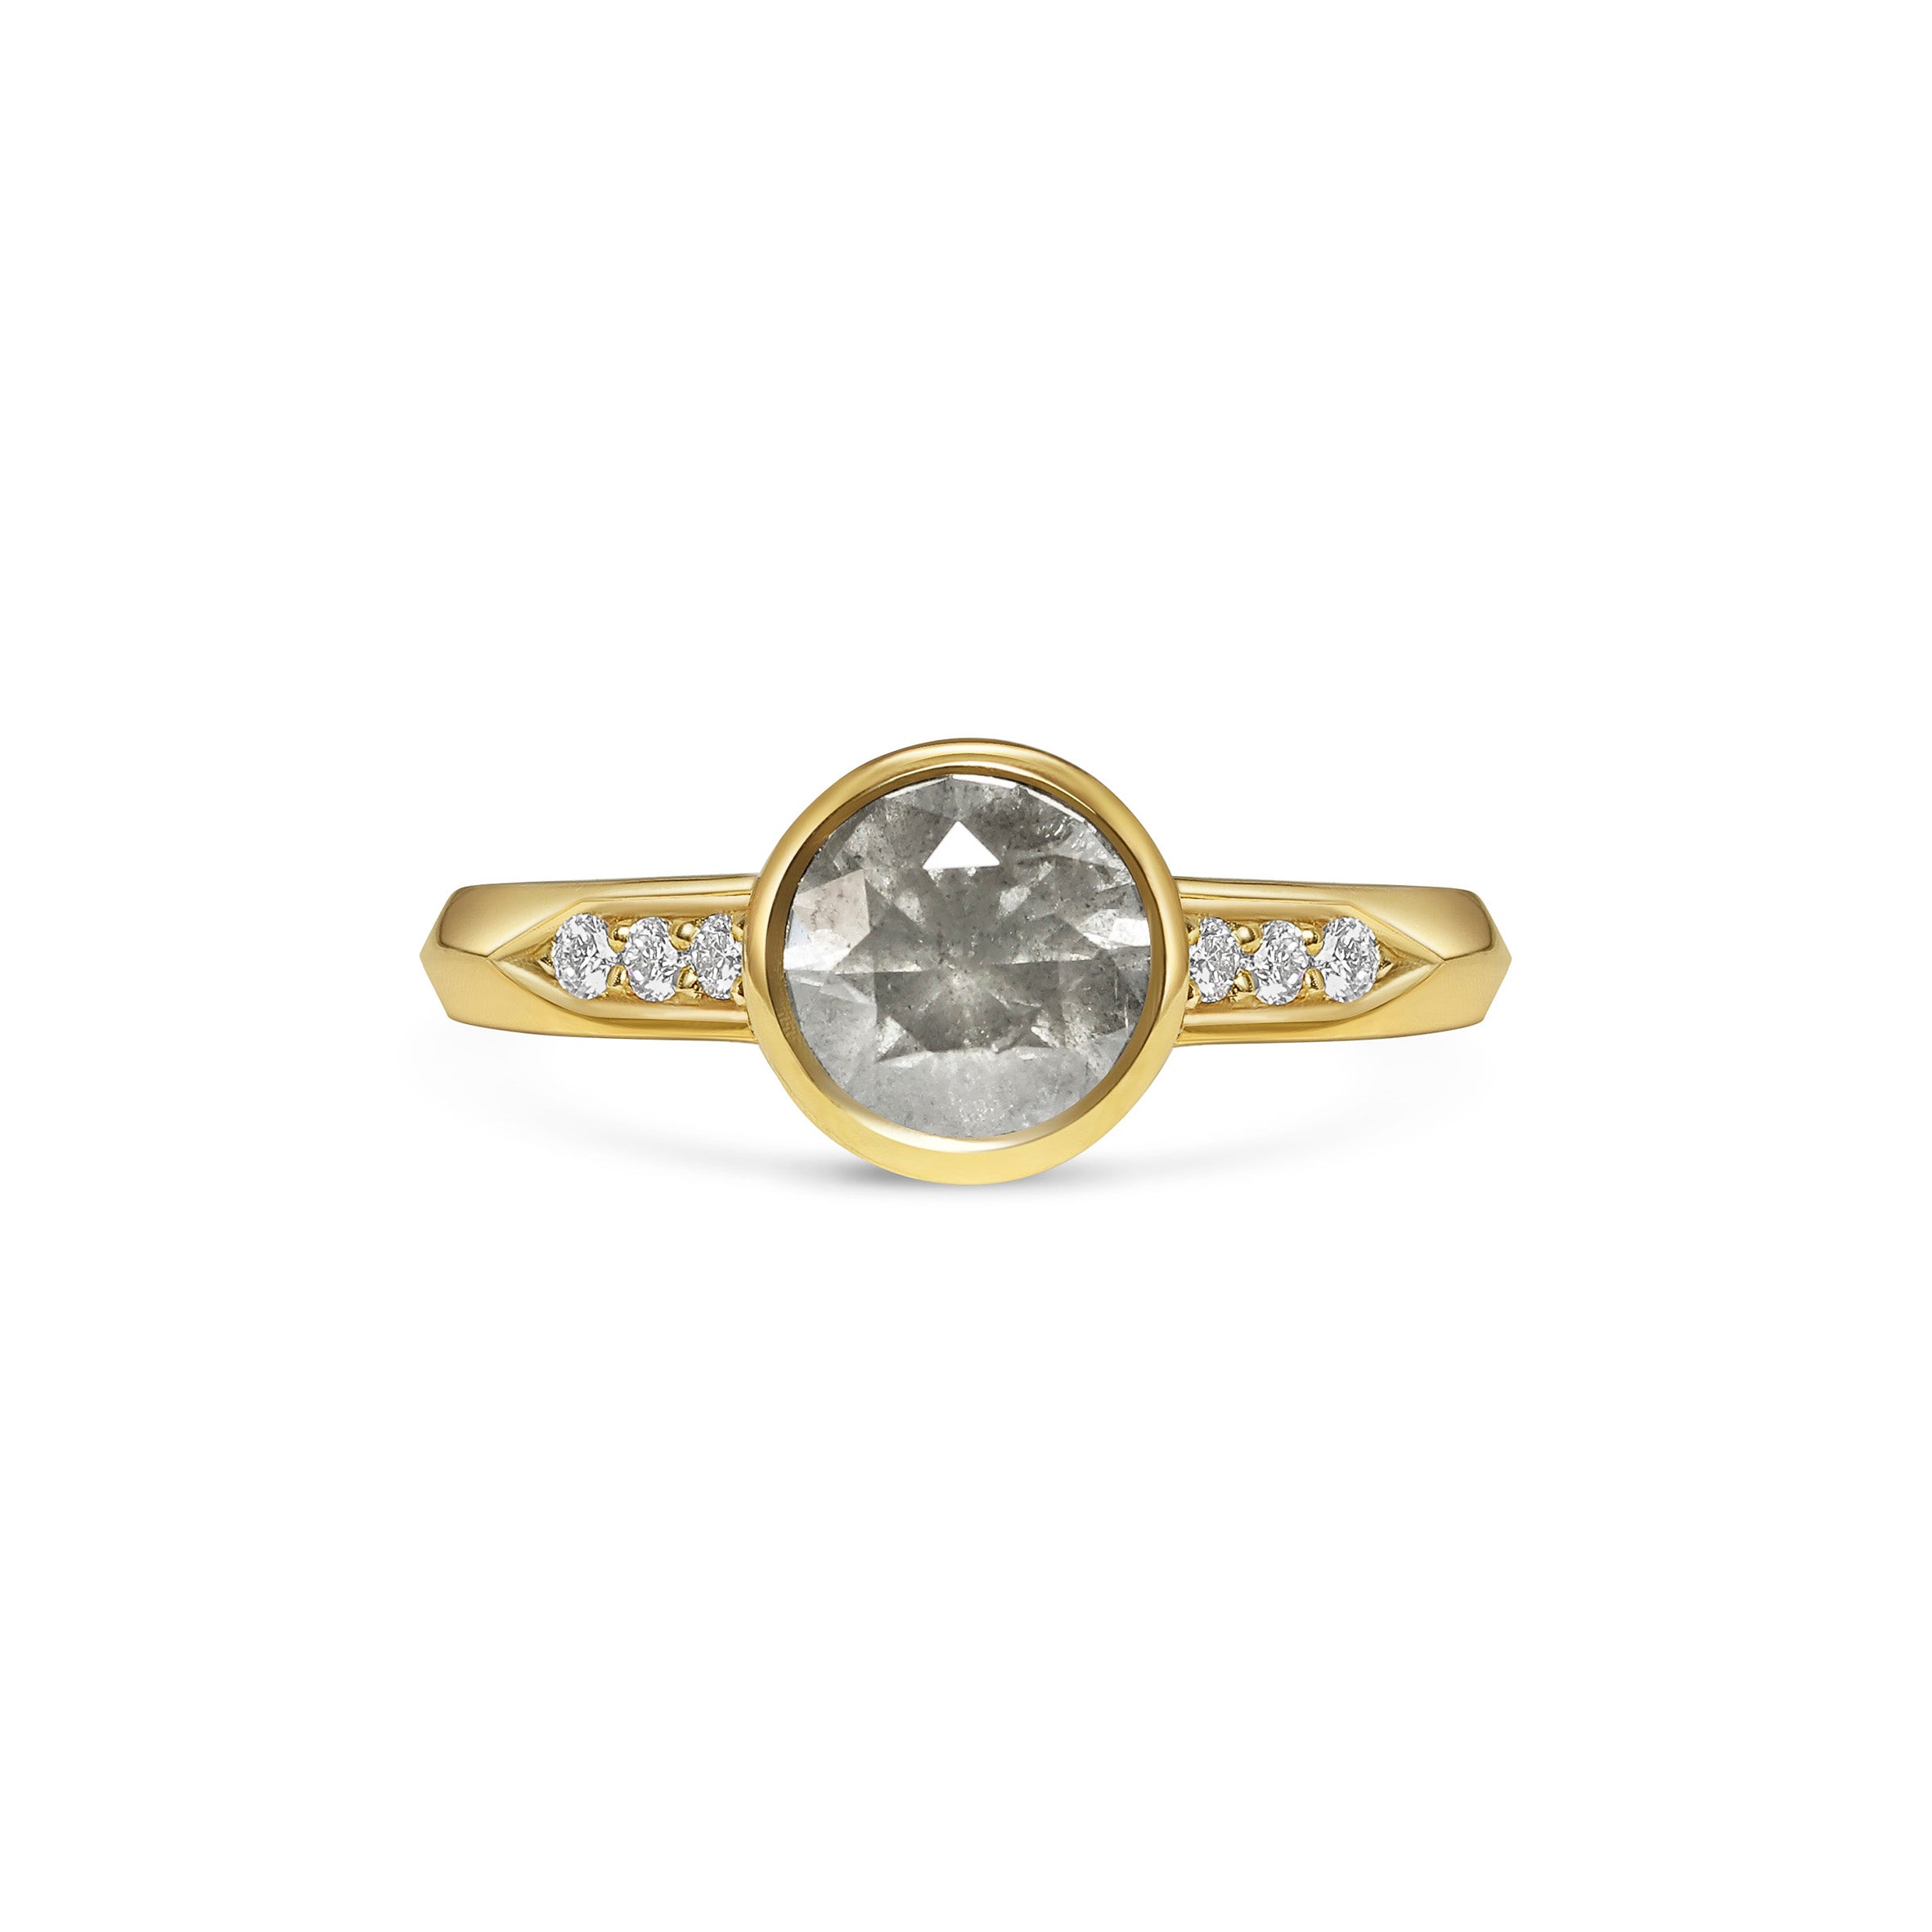 The Aurelia Ring by East London jeweller Rachel Boston | Discover our collections of unique and timeless engagement rings, wedding rings, and modern fine jewellery.